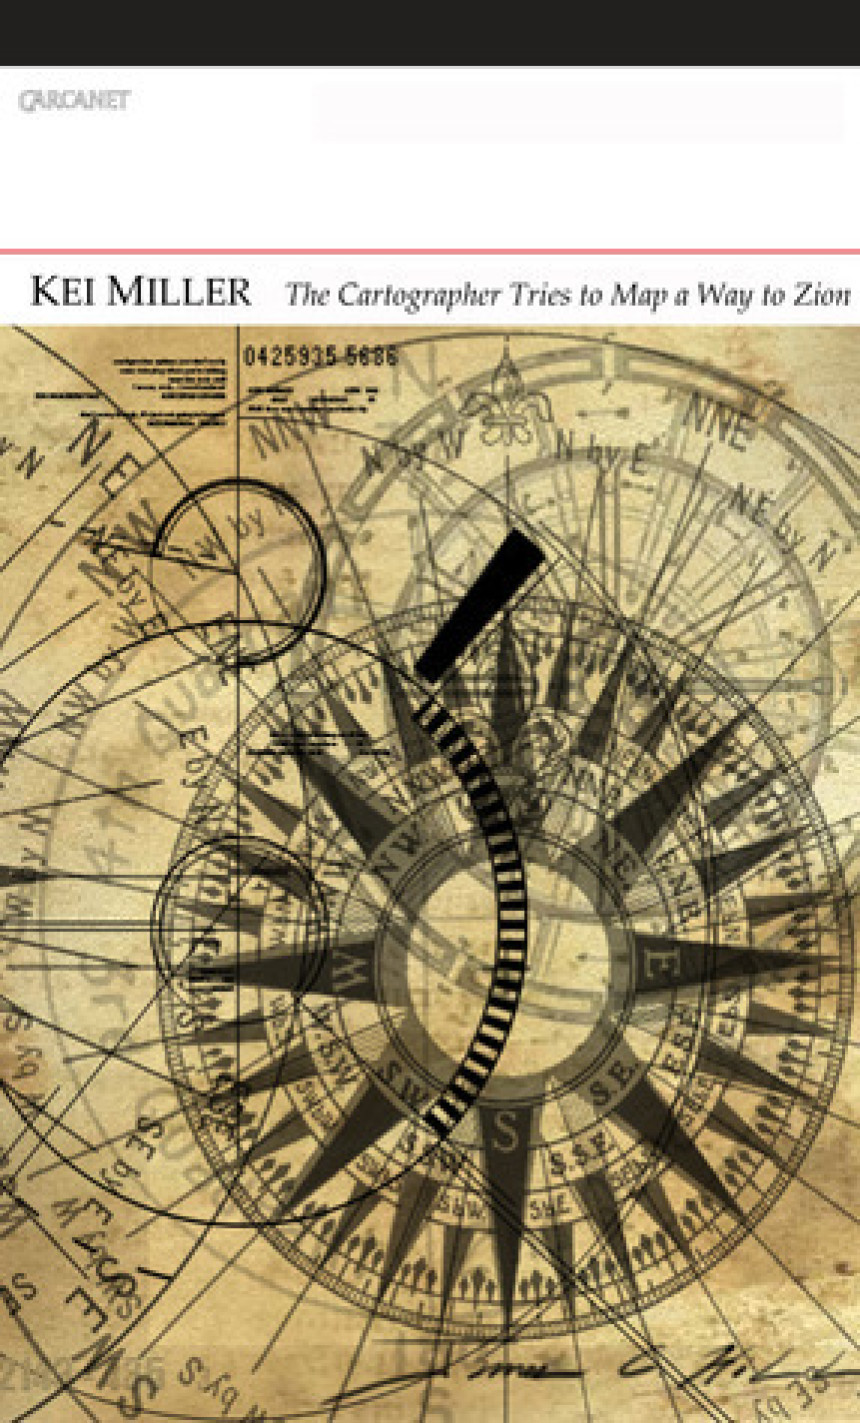 Free Download The Cartographer Tries to Map a Way to Zion by Kei Miller